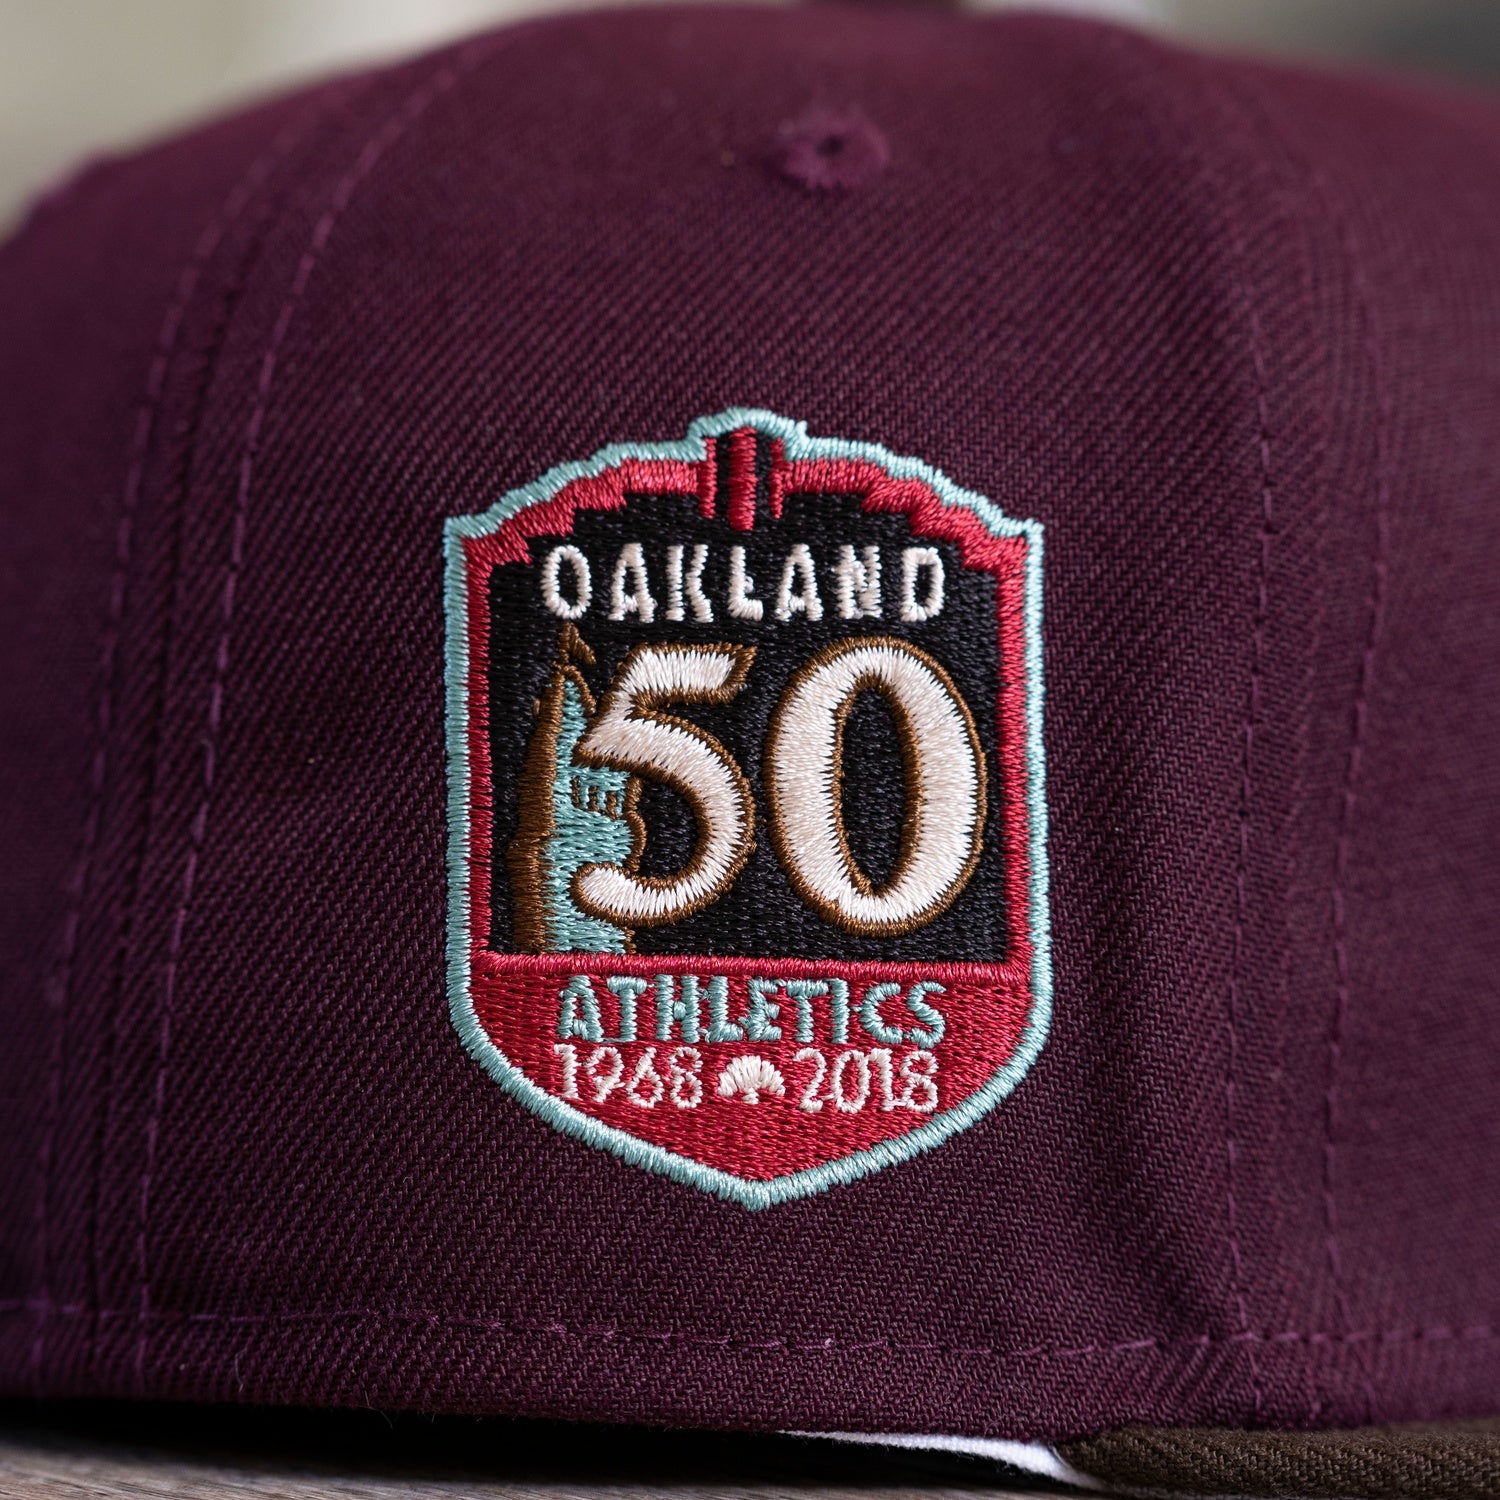 NEW ERA 59FIFTY MLB OAKLAND ATHLETICS 50TH ANNIVERSARY TWO TONE / GREY UV  FITTED CAP